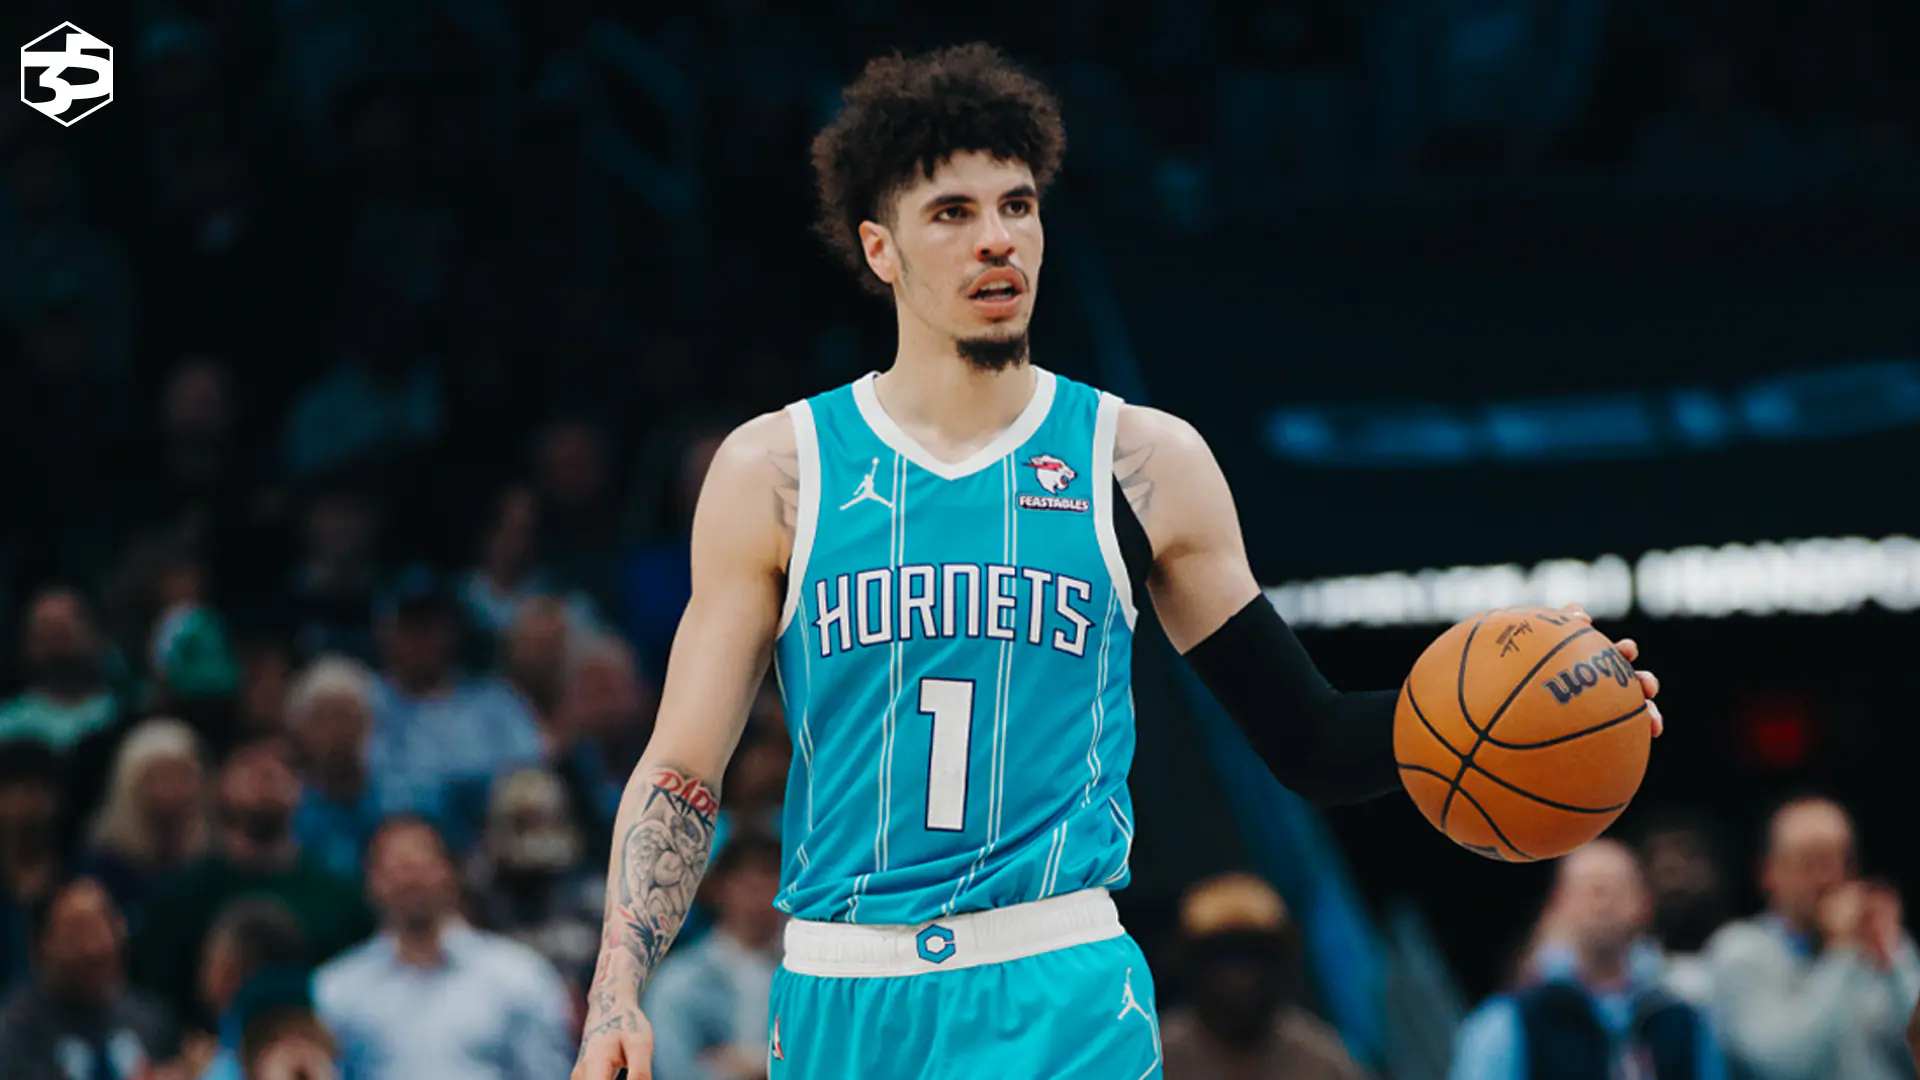 Charlotte Hornets' Future: Building Around LaMelo Ball